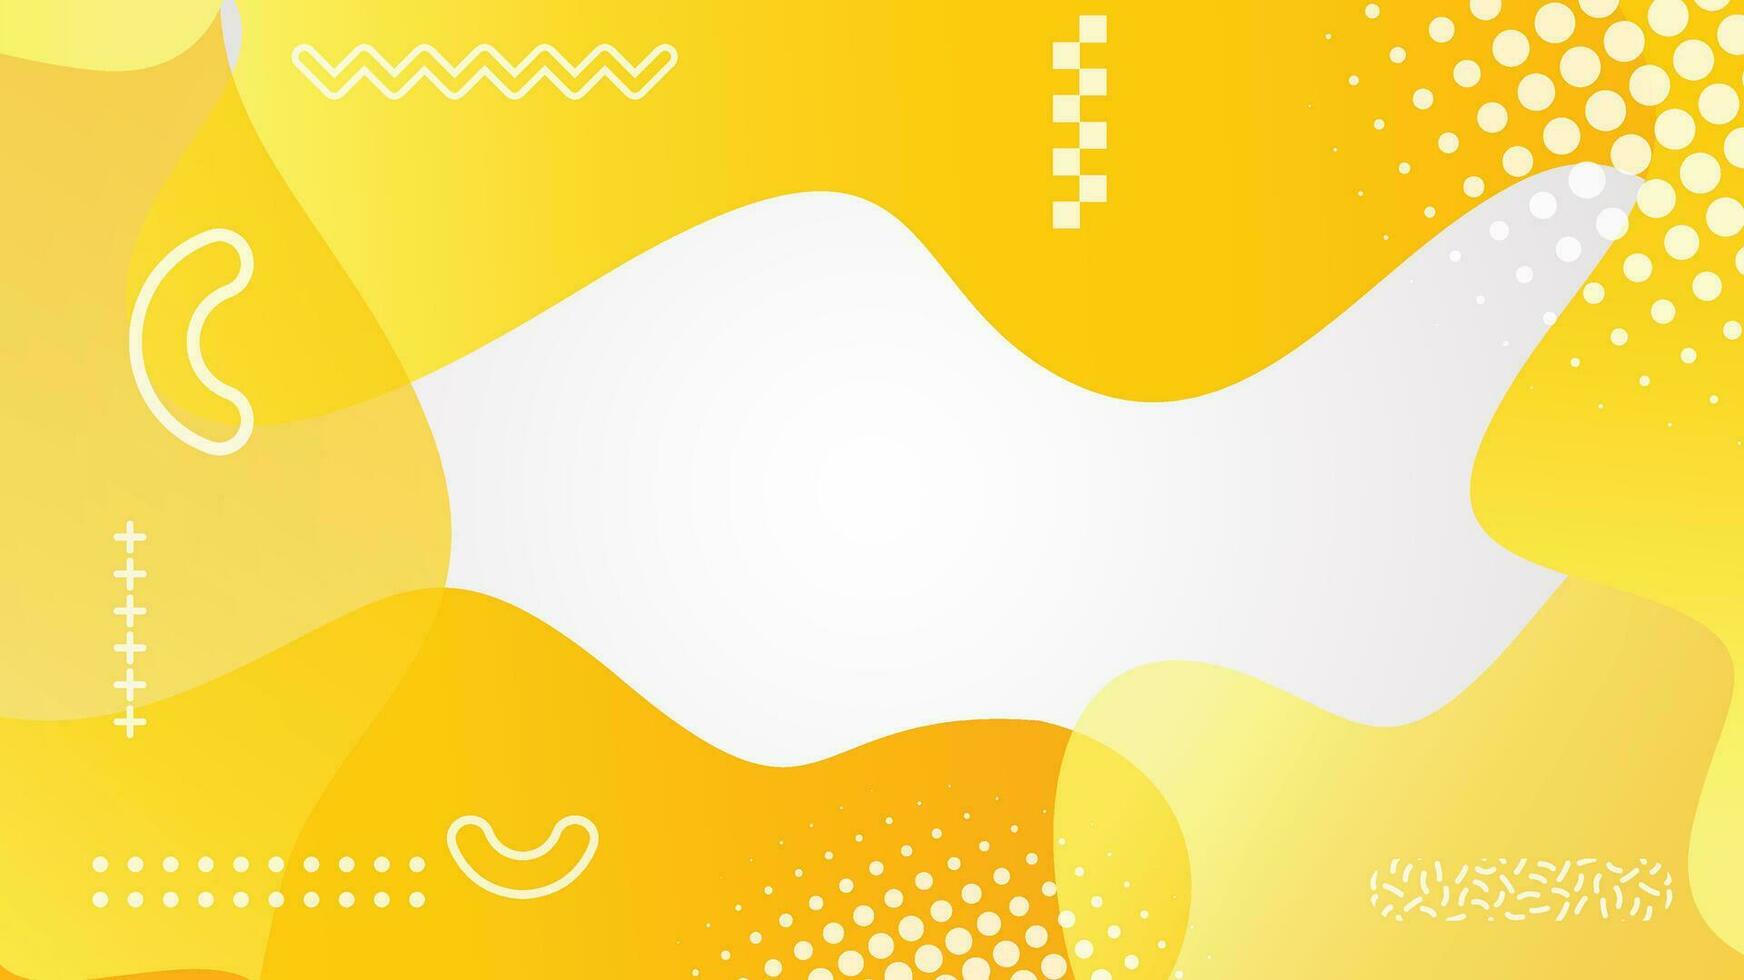 Prinwhite and yellow dynamic fluid shapes abstract background vector